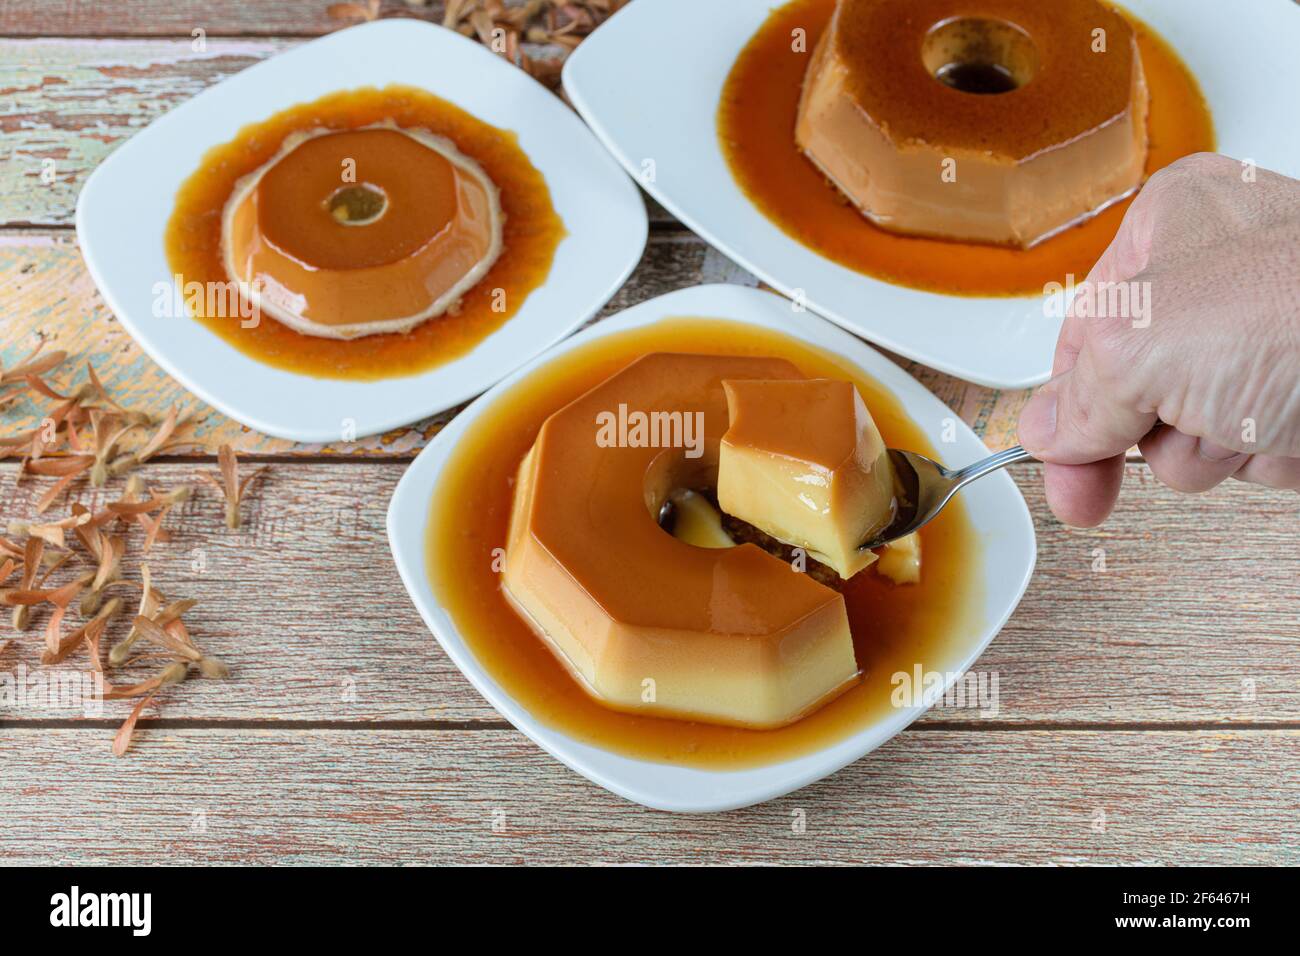 Man taking a slice with a spoon of condensed milk pudding with caramel sauce, alongside other puddings and flying seeds (Triplaris amaricana). Traditi Stock Photo